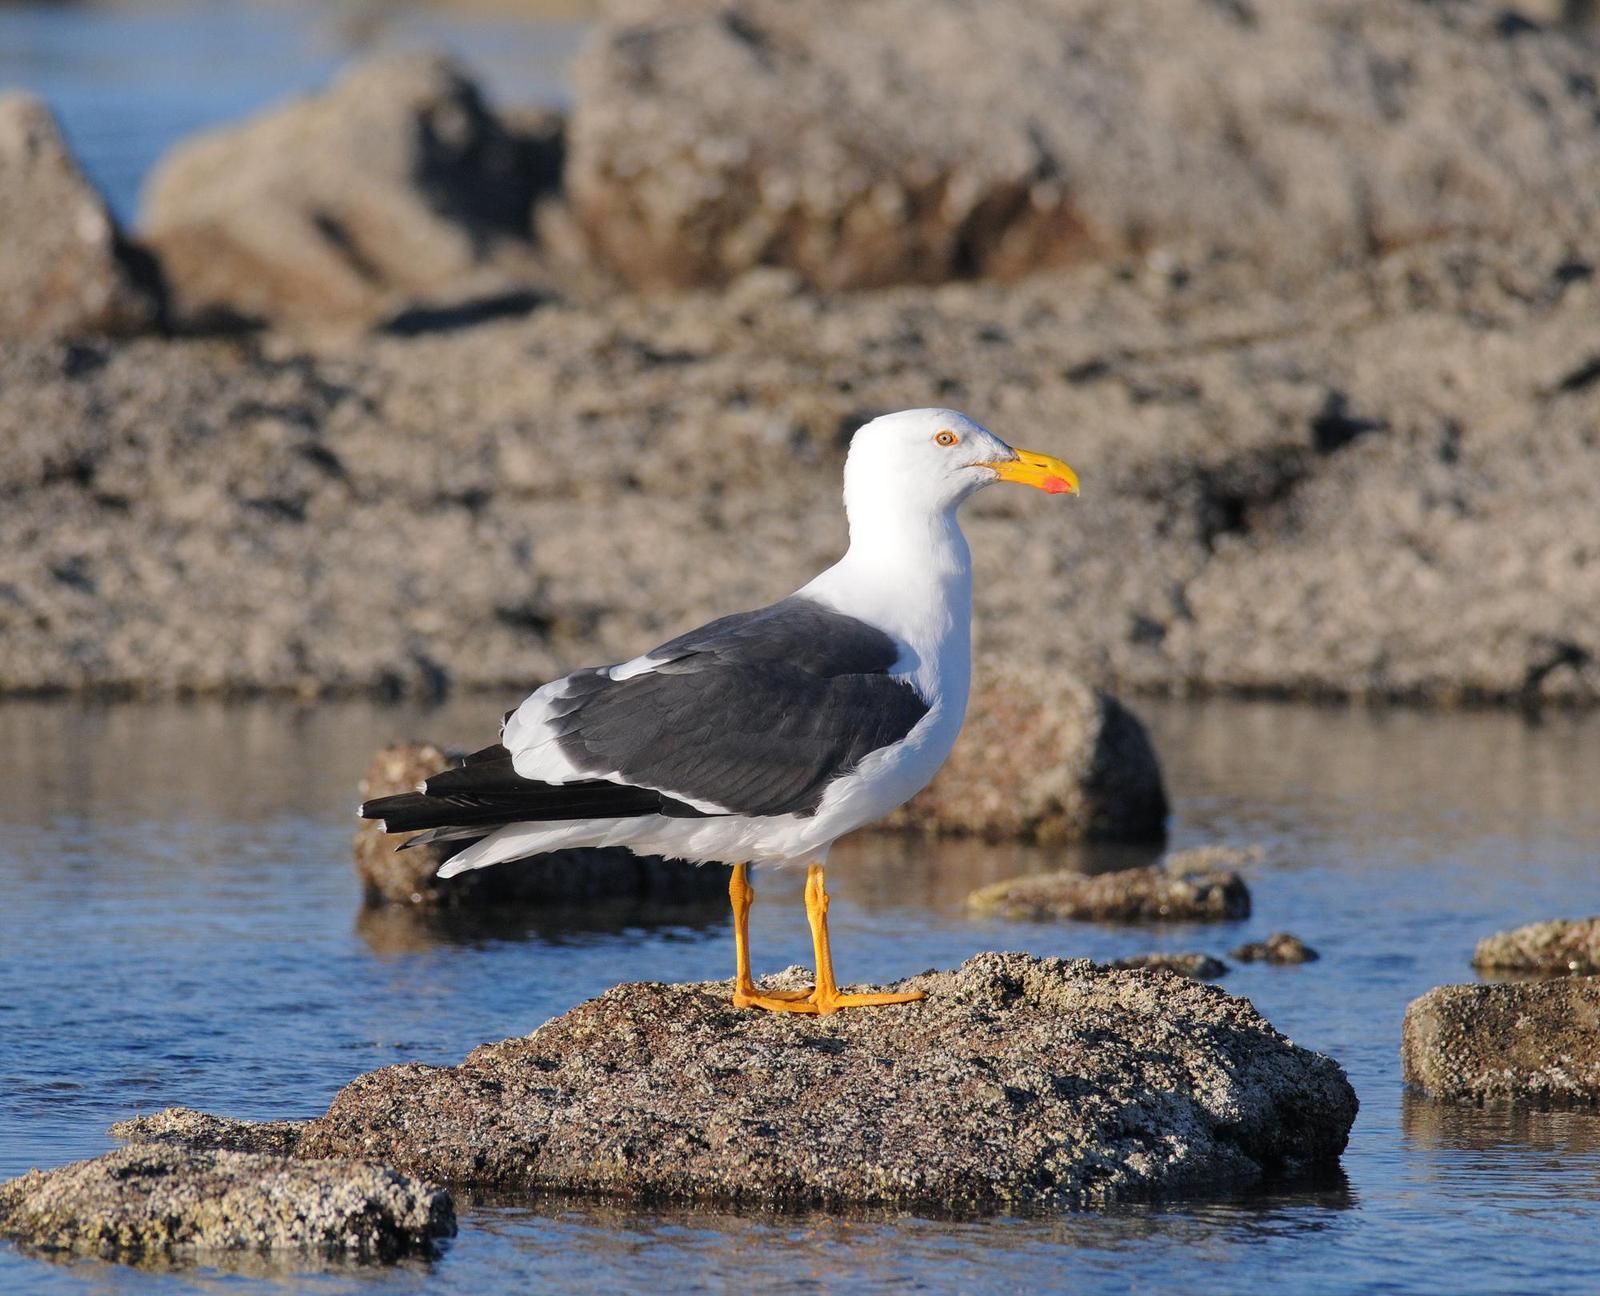 Yellow-footed Gull Photo by Steven Mlodinow